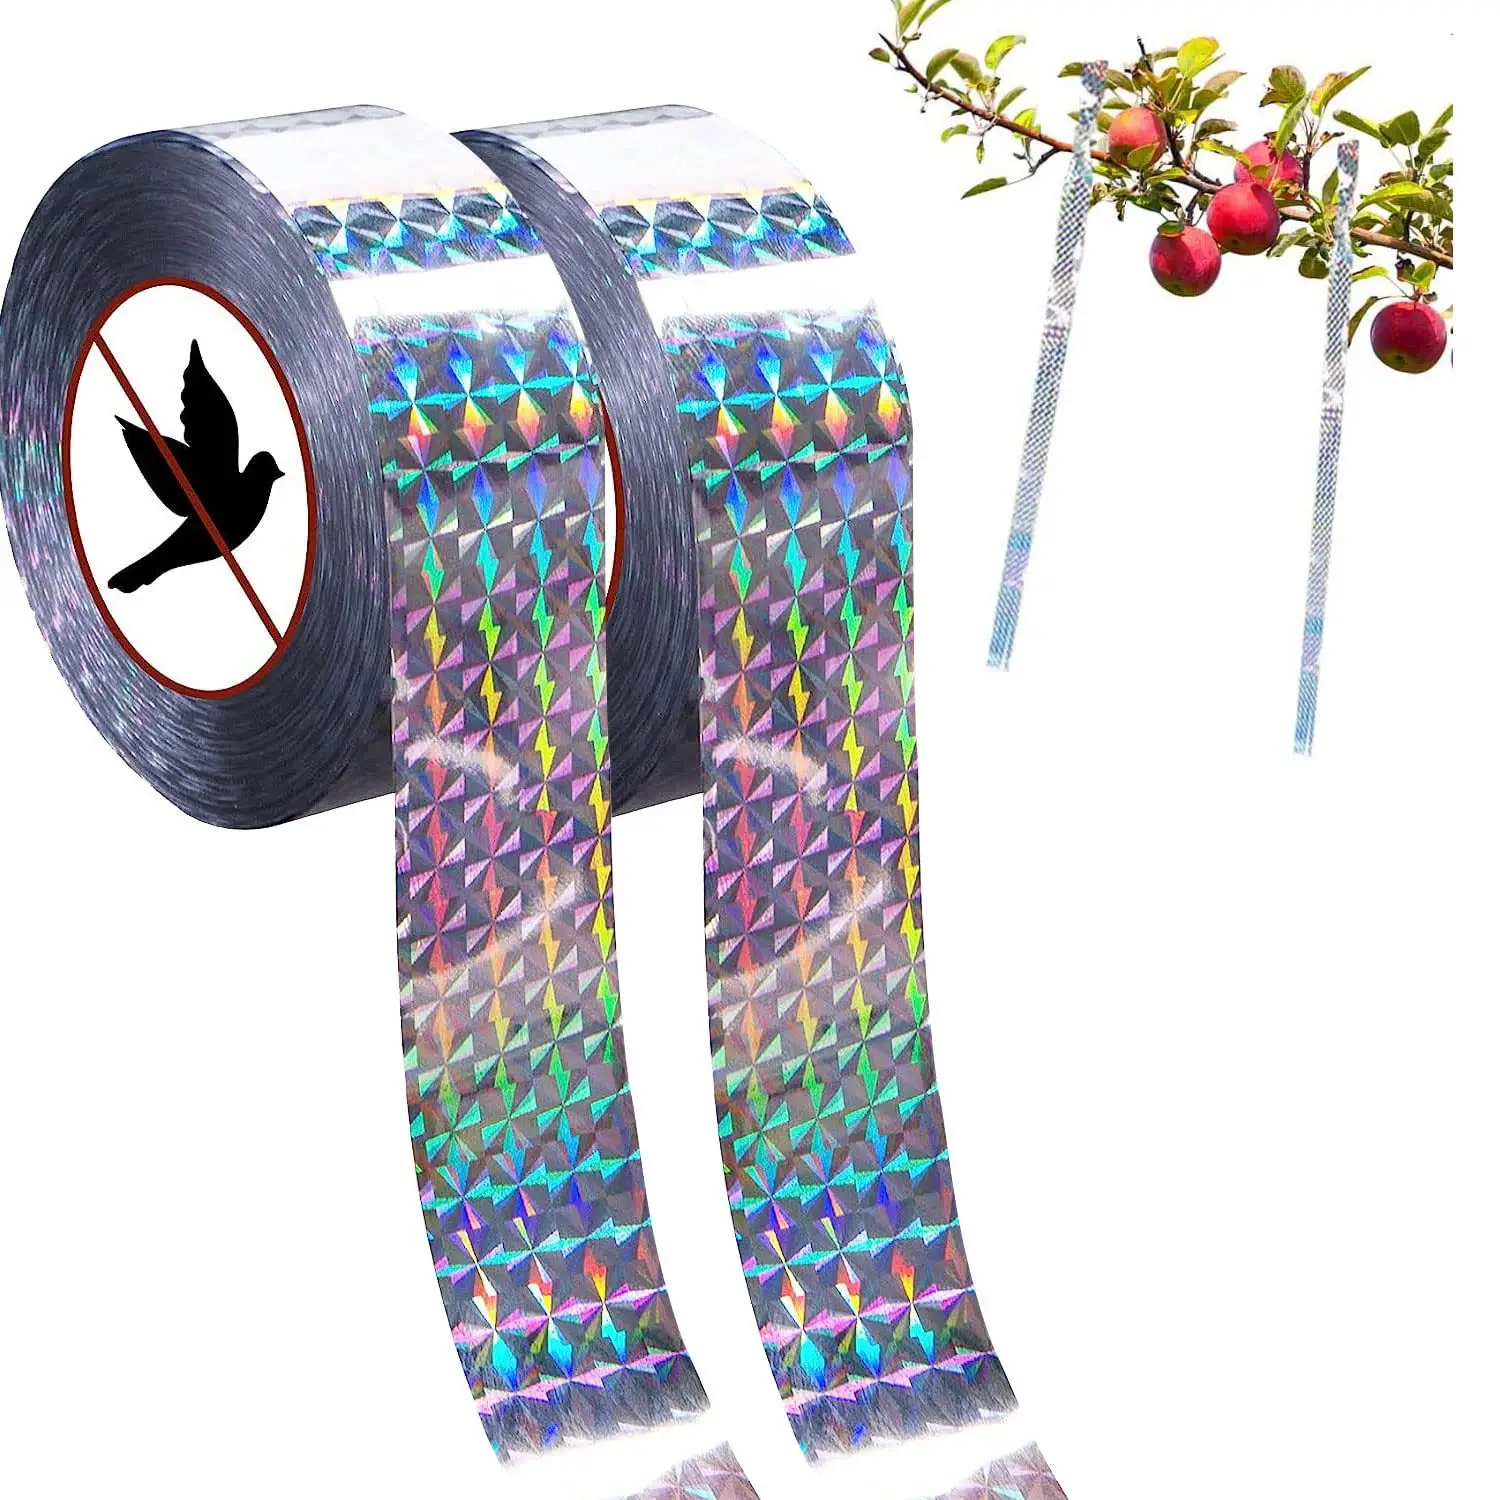 OEM Bird Deterrent Flashing Reflective Scare Tape Bird Control Dual-sided Repellent Ribbon